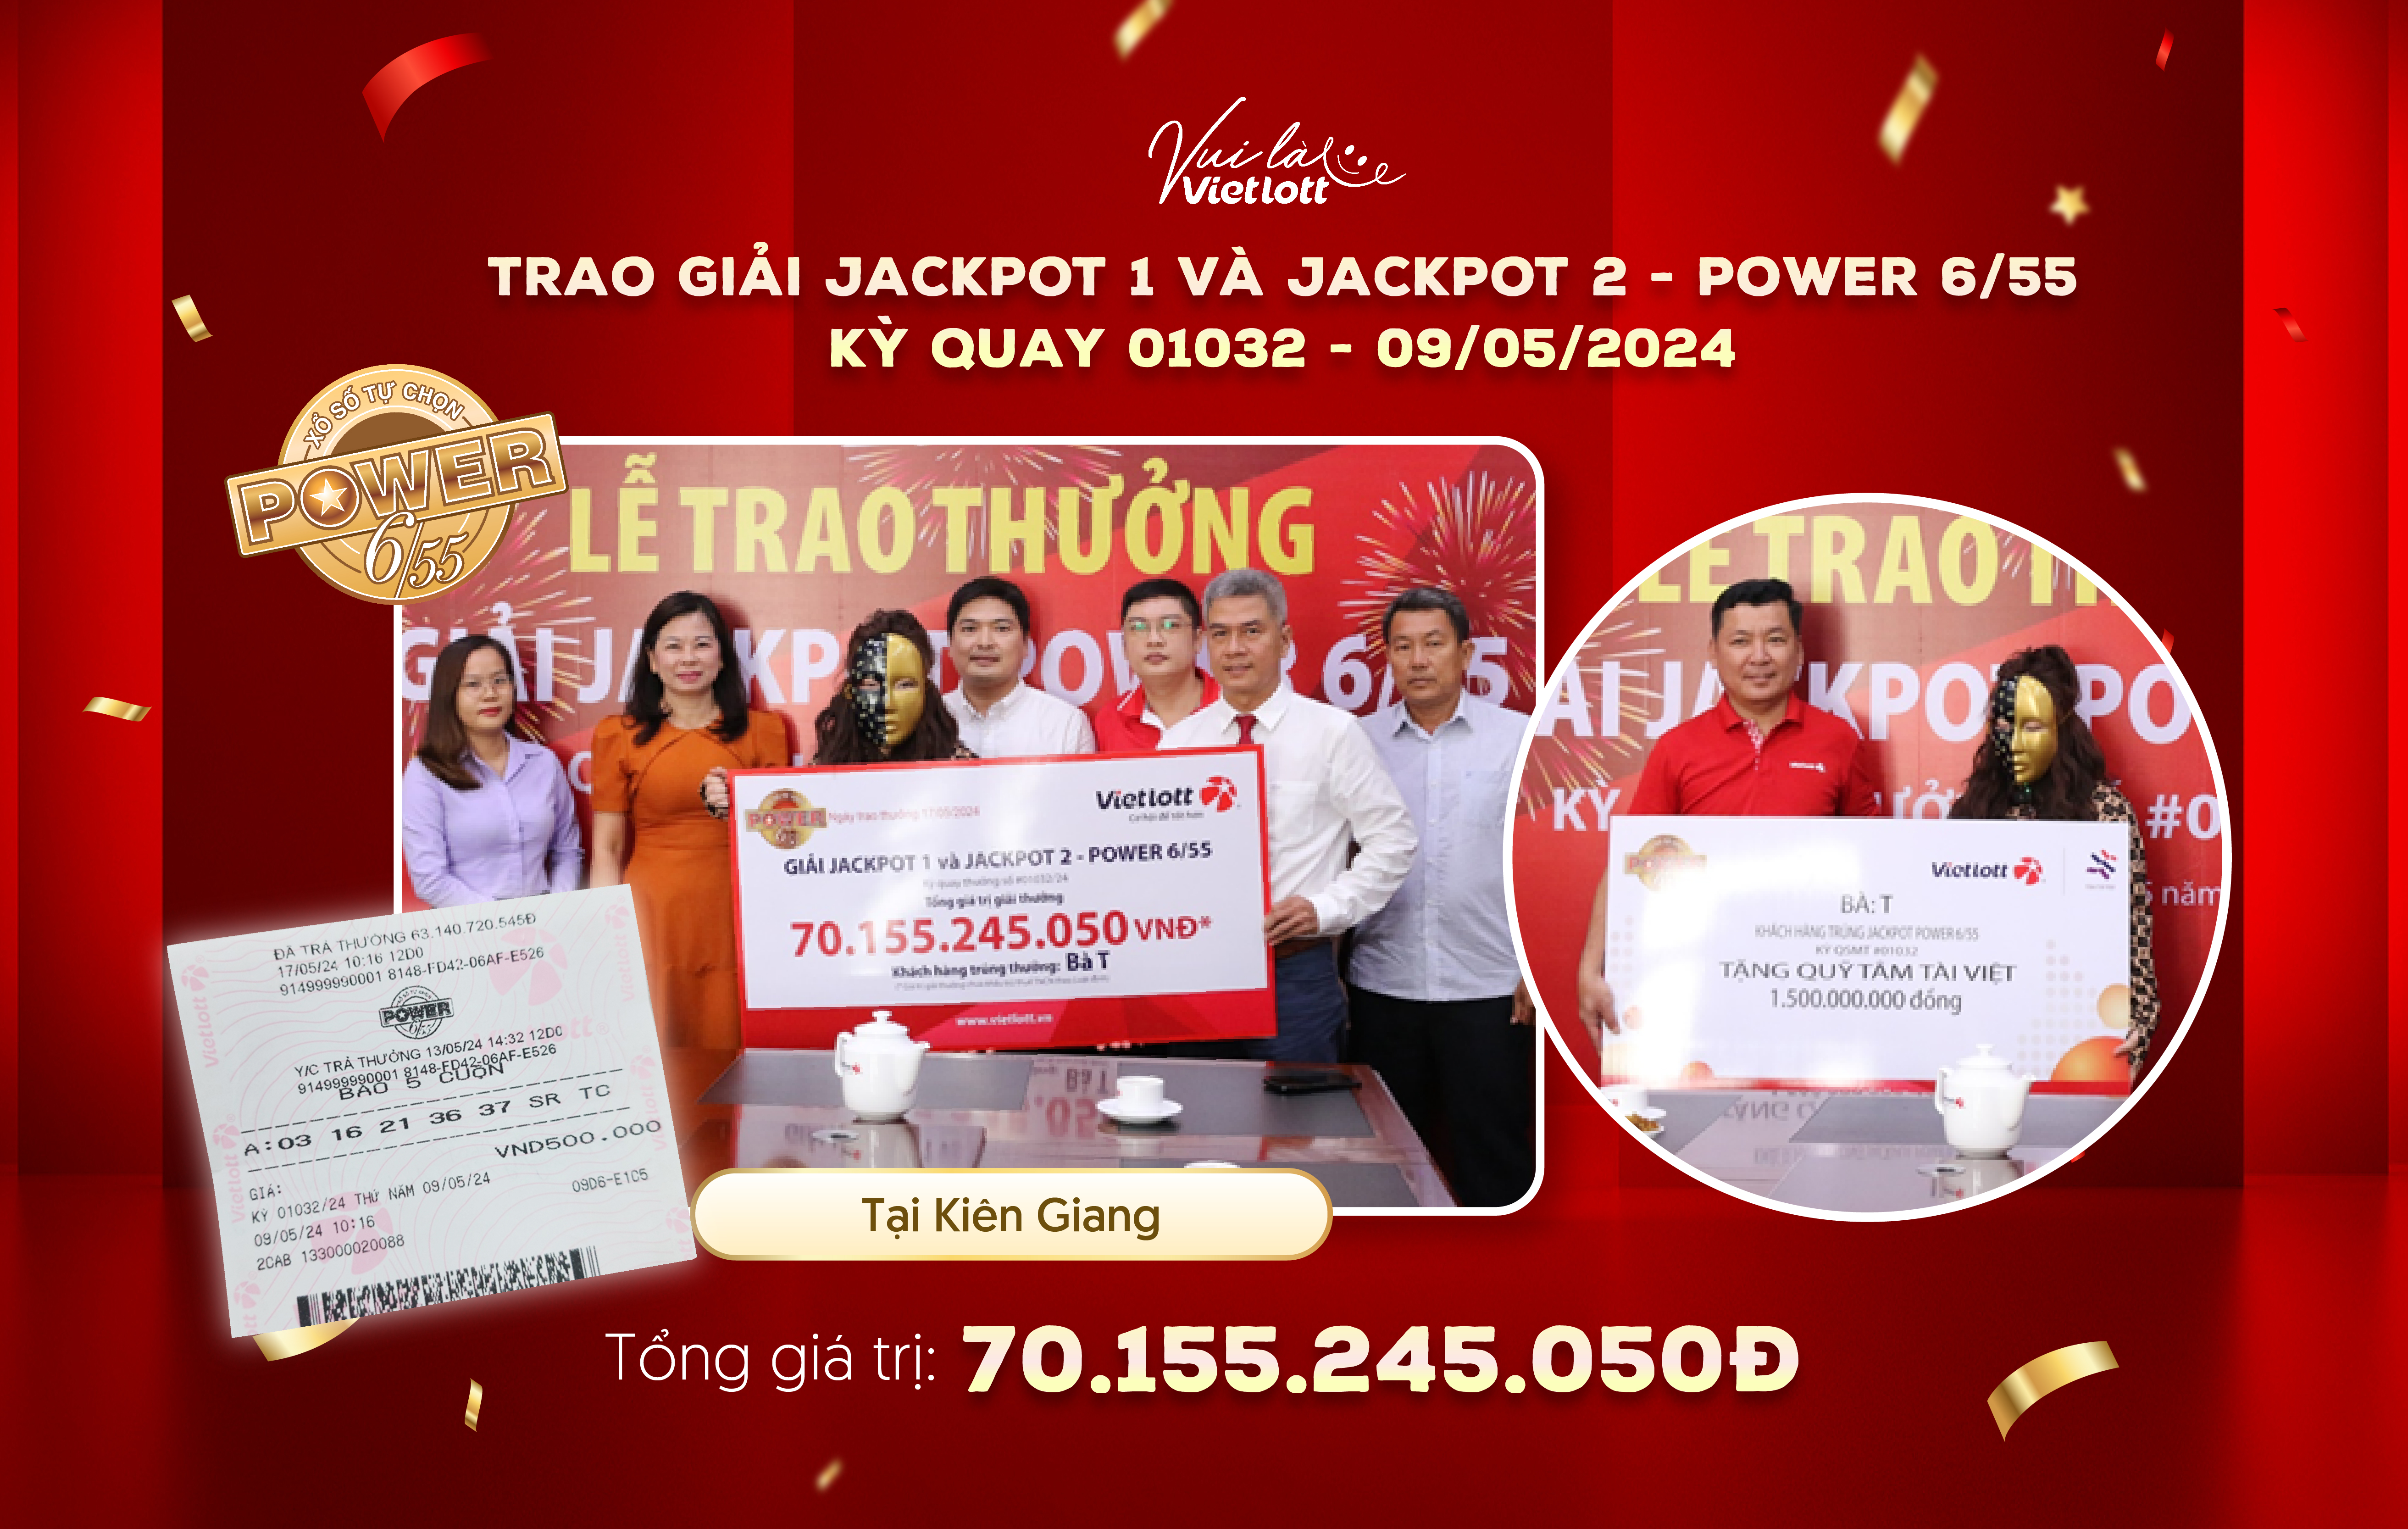 FIRST PLAYER FROM KIÊN GIANG WINS BOTH JACKPOT 1 AND JACKPOT 2 OF POWER 6/55 LOTTERY